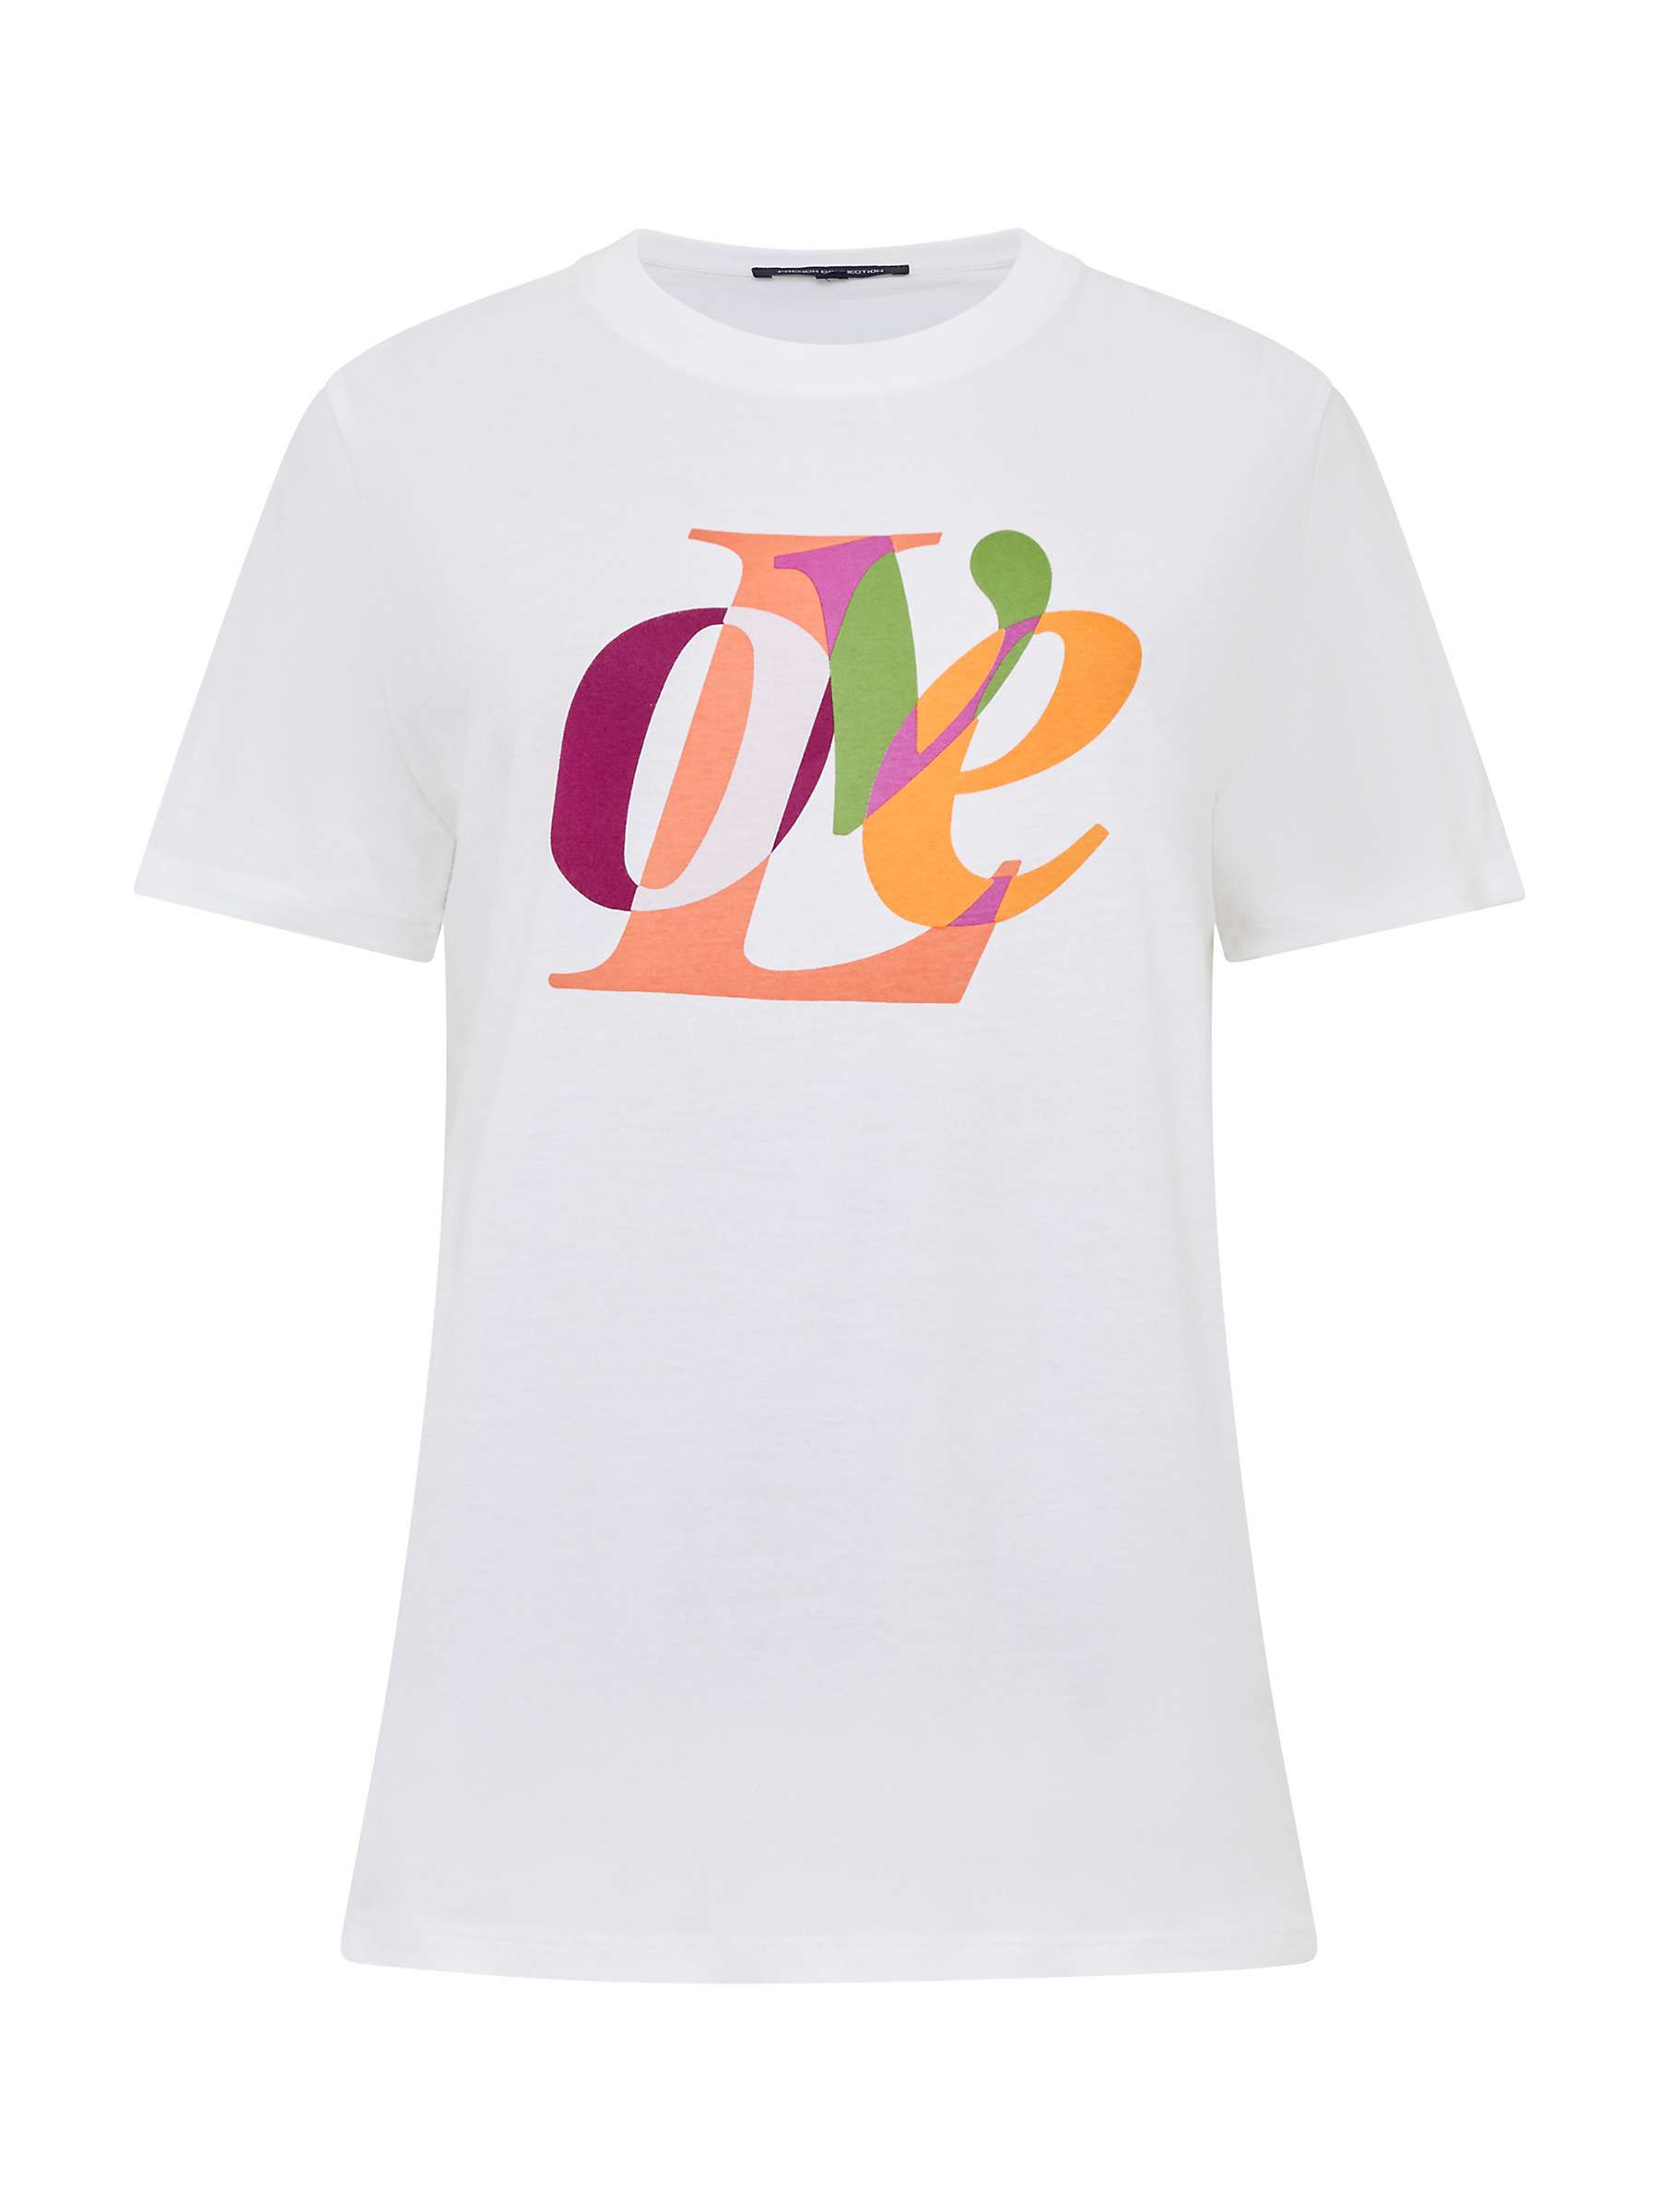 Buy French Connection Love Graphic T-Shirt, Linen White Online at johnlewis.com